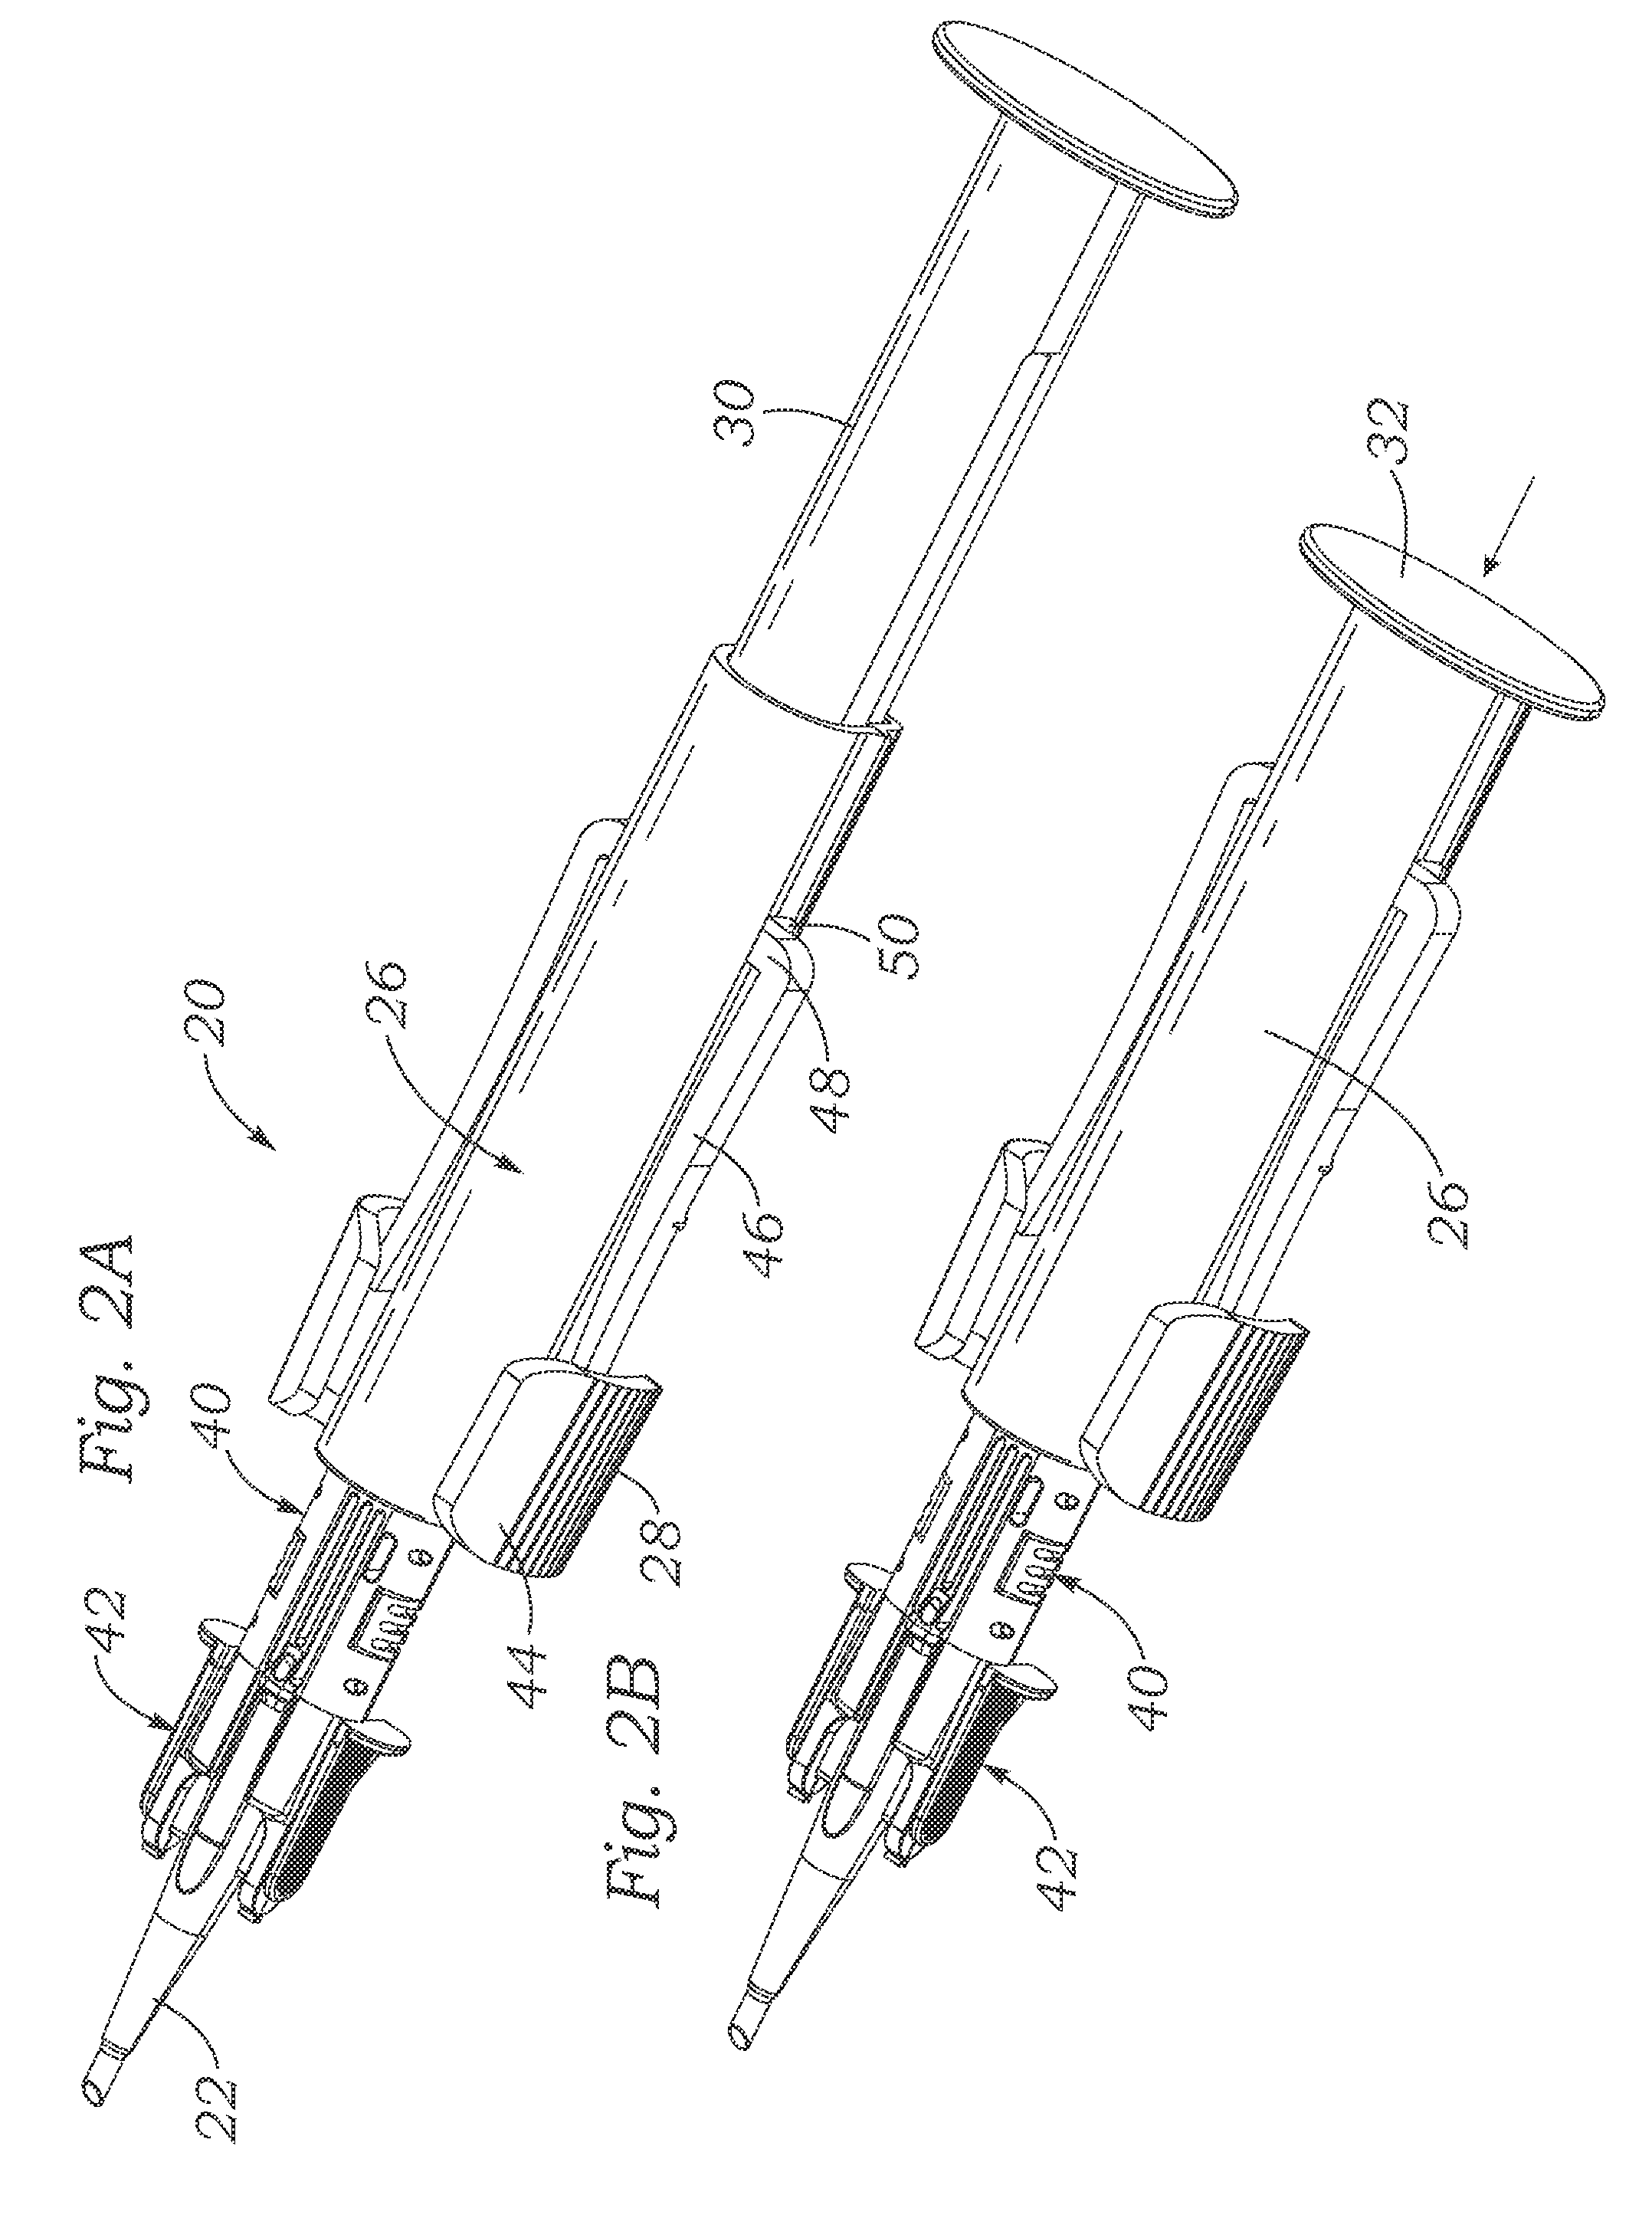 Automated preloaded intraocular lens injector